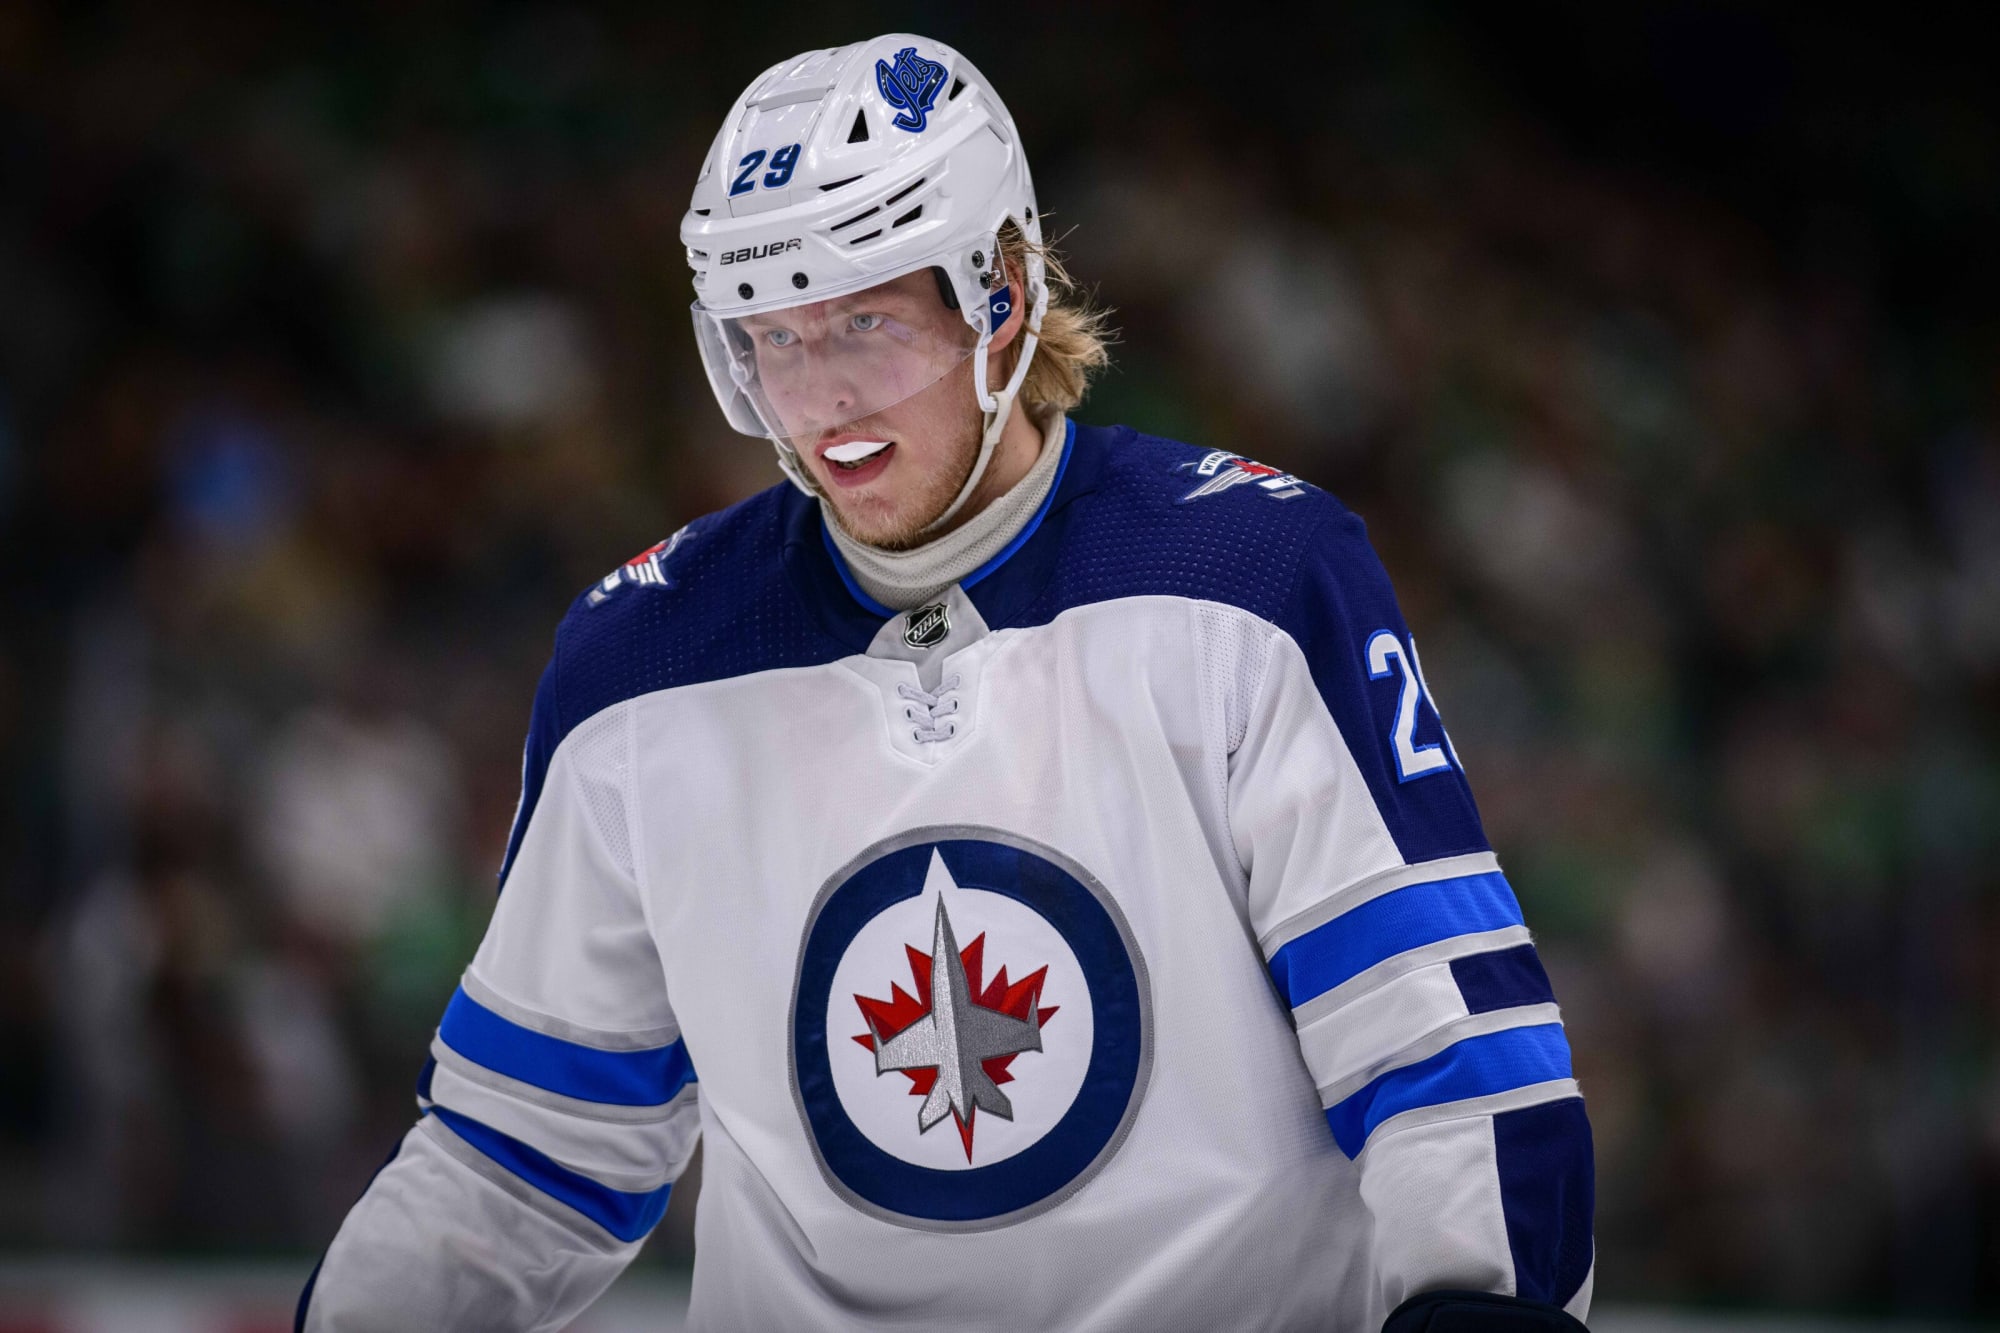 JETS SETTING: The day Patrik Laine was traded